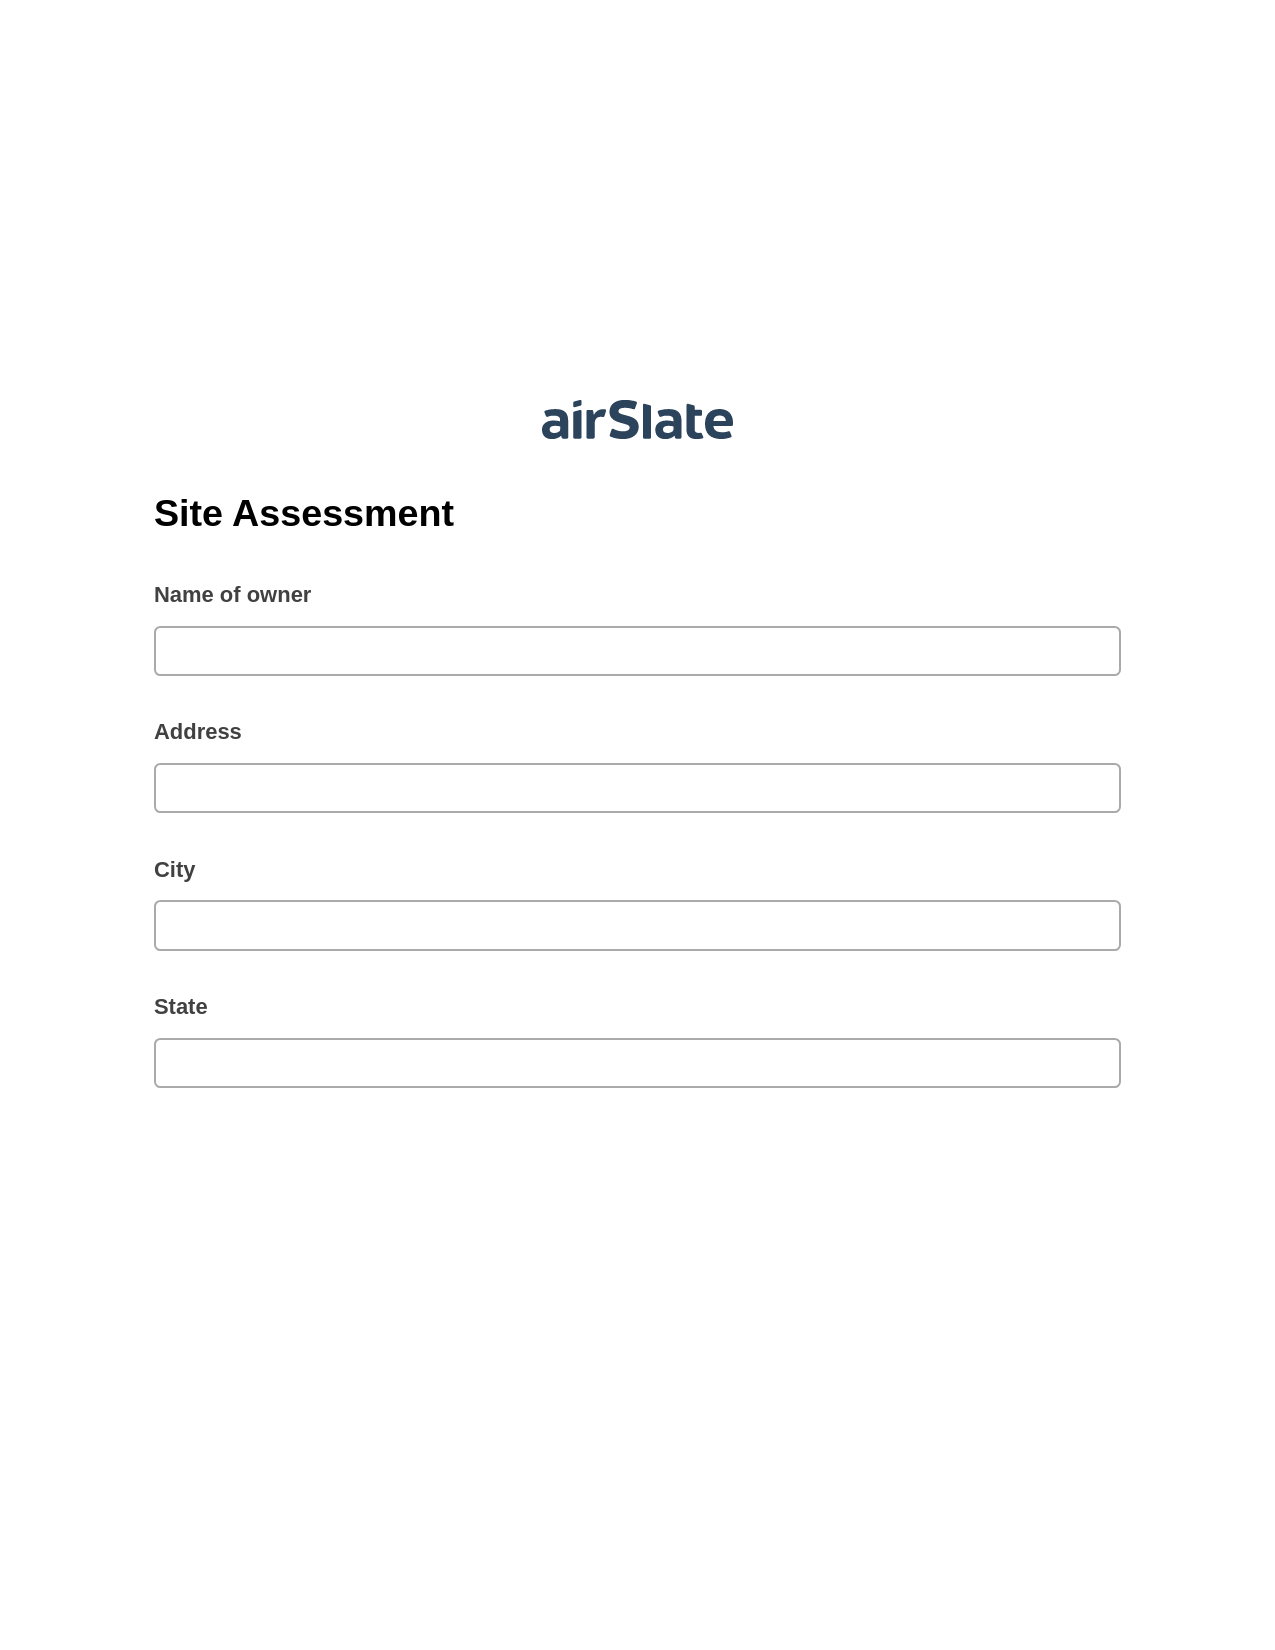 Site Assessment Pre-fill from CSV File Dropdown Options Bot, Reminder Bot, Archive to SharePoint Folder Bot